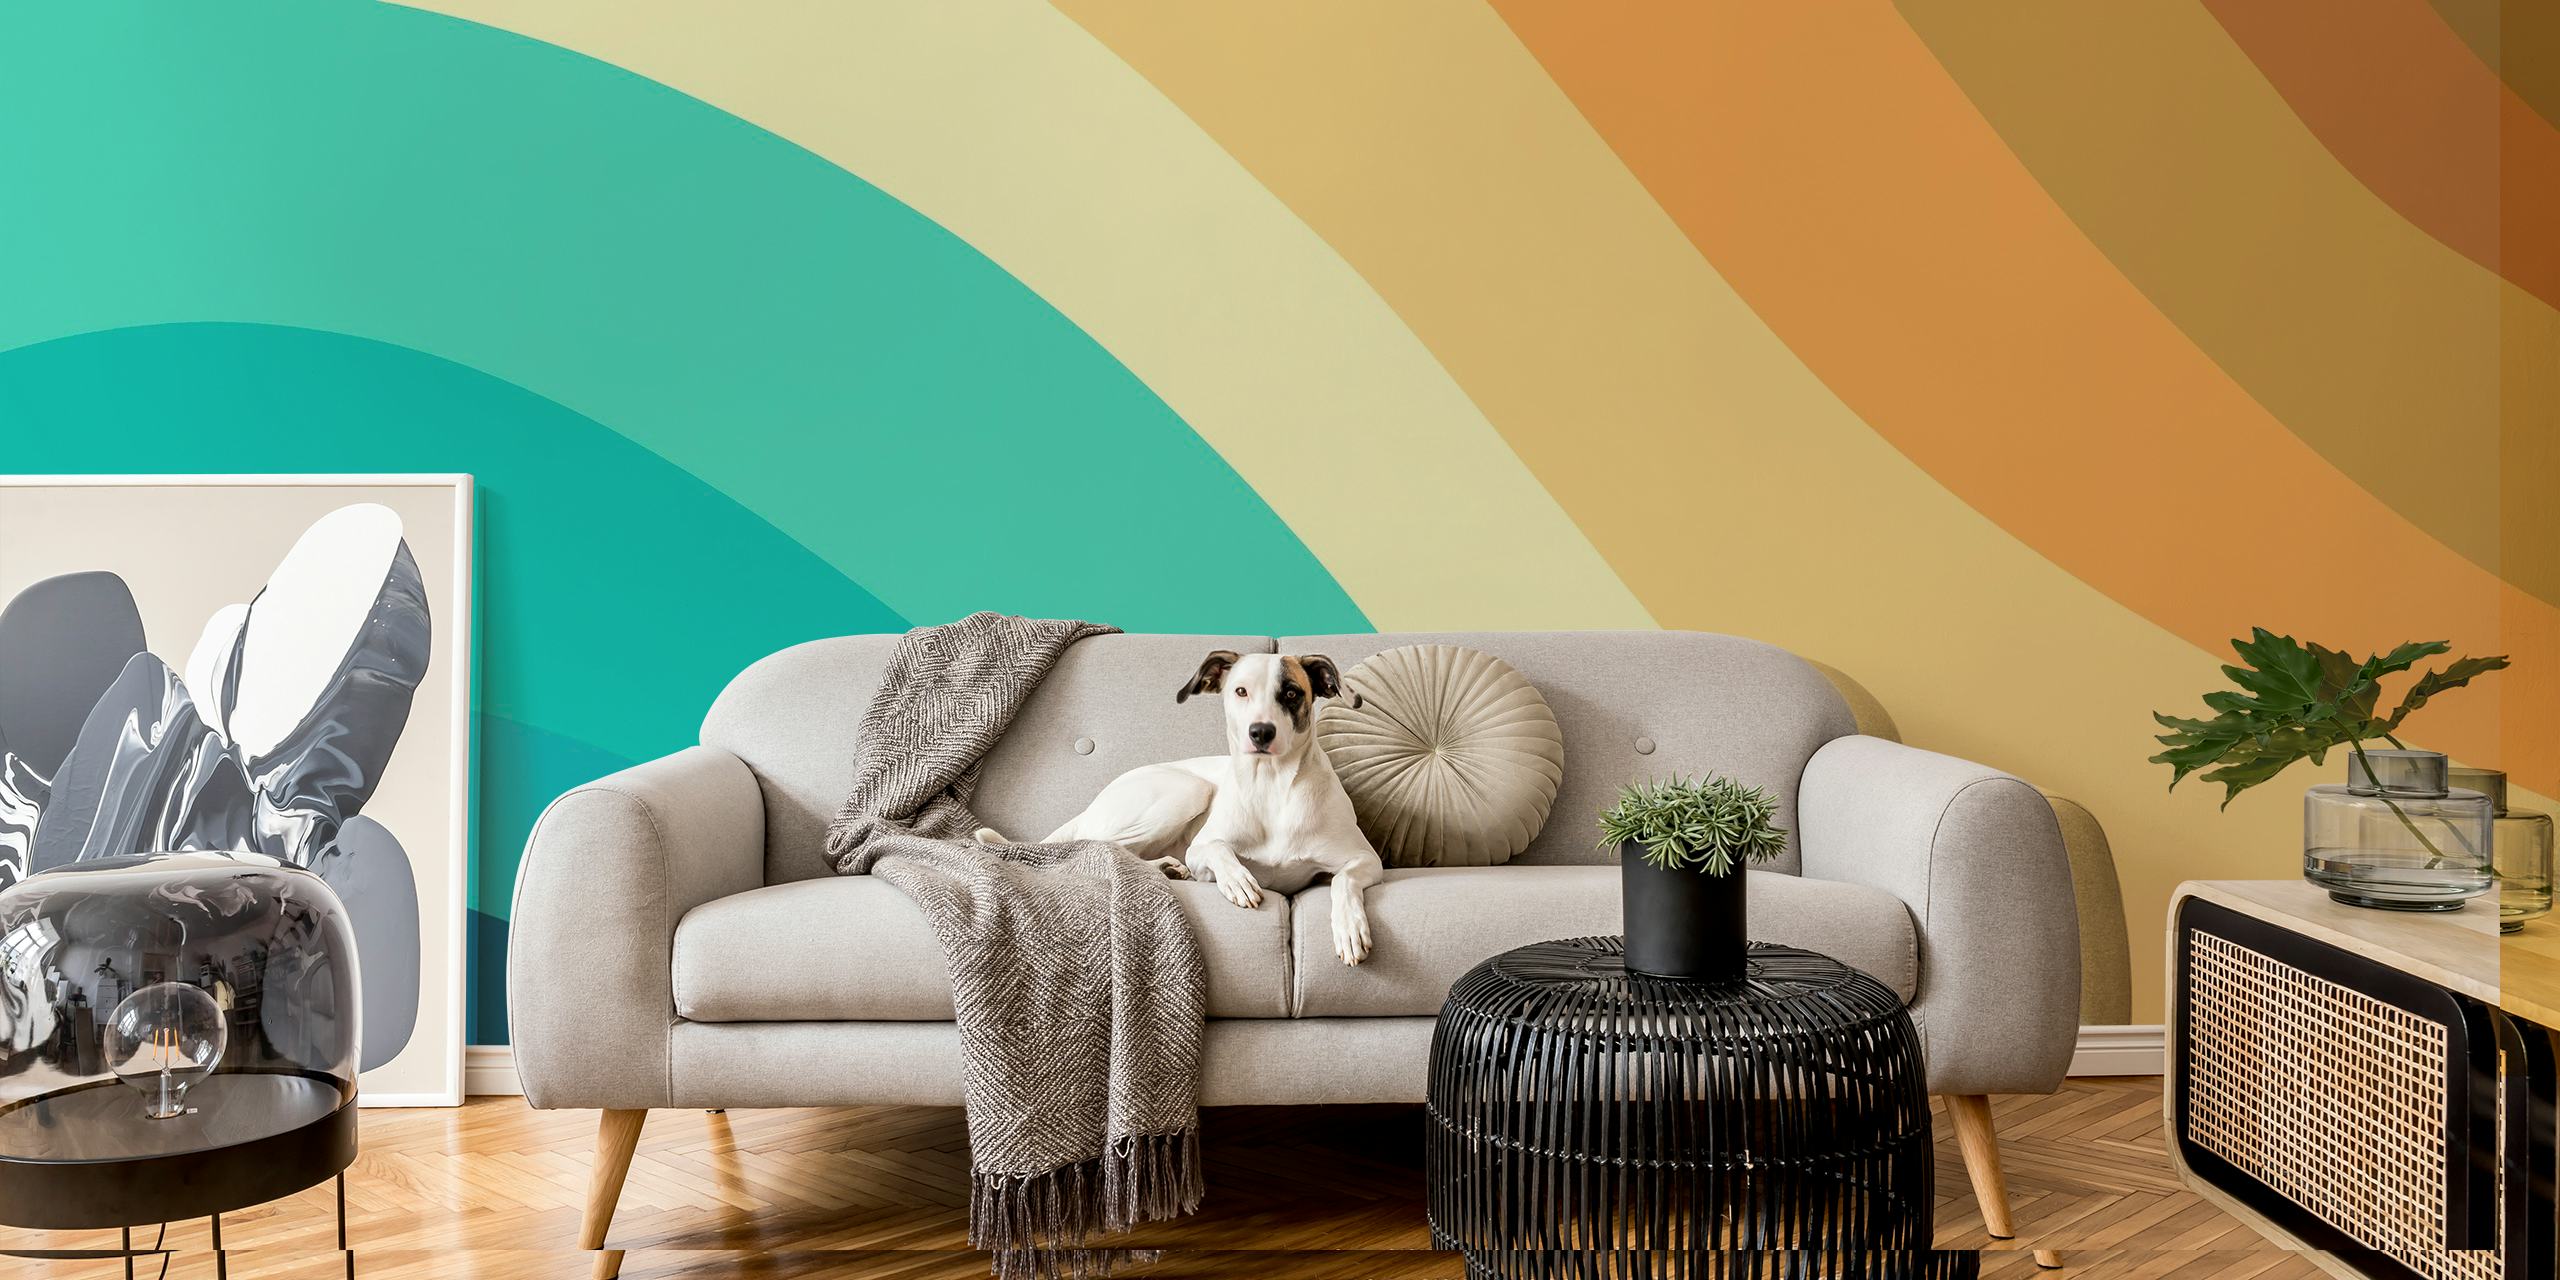 Retro Summer Wave 2b wall mural with warm palette of orange, teal, and beige